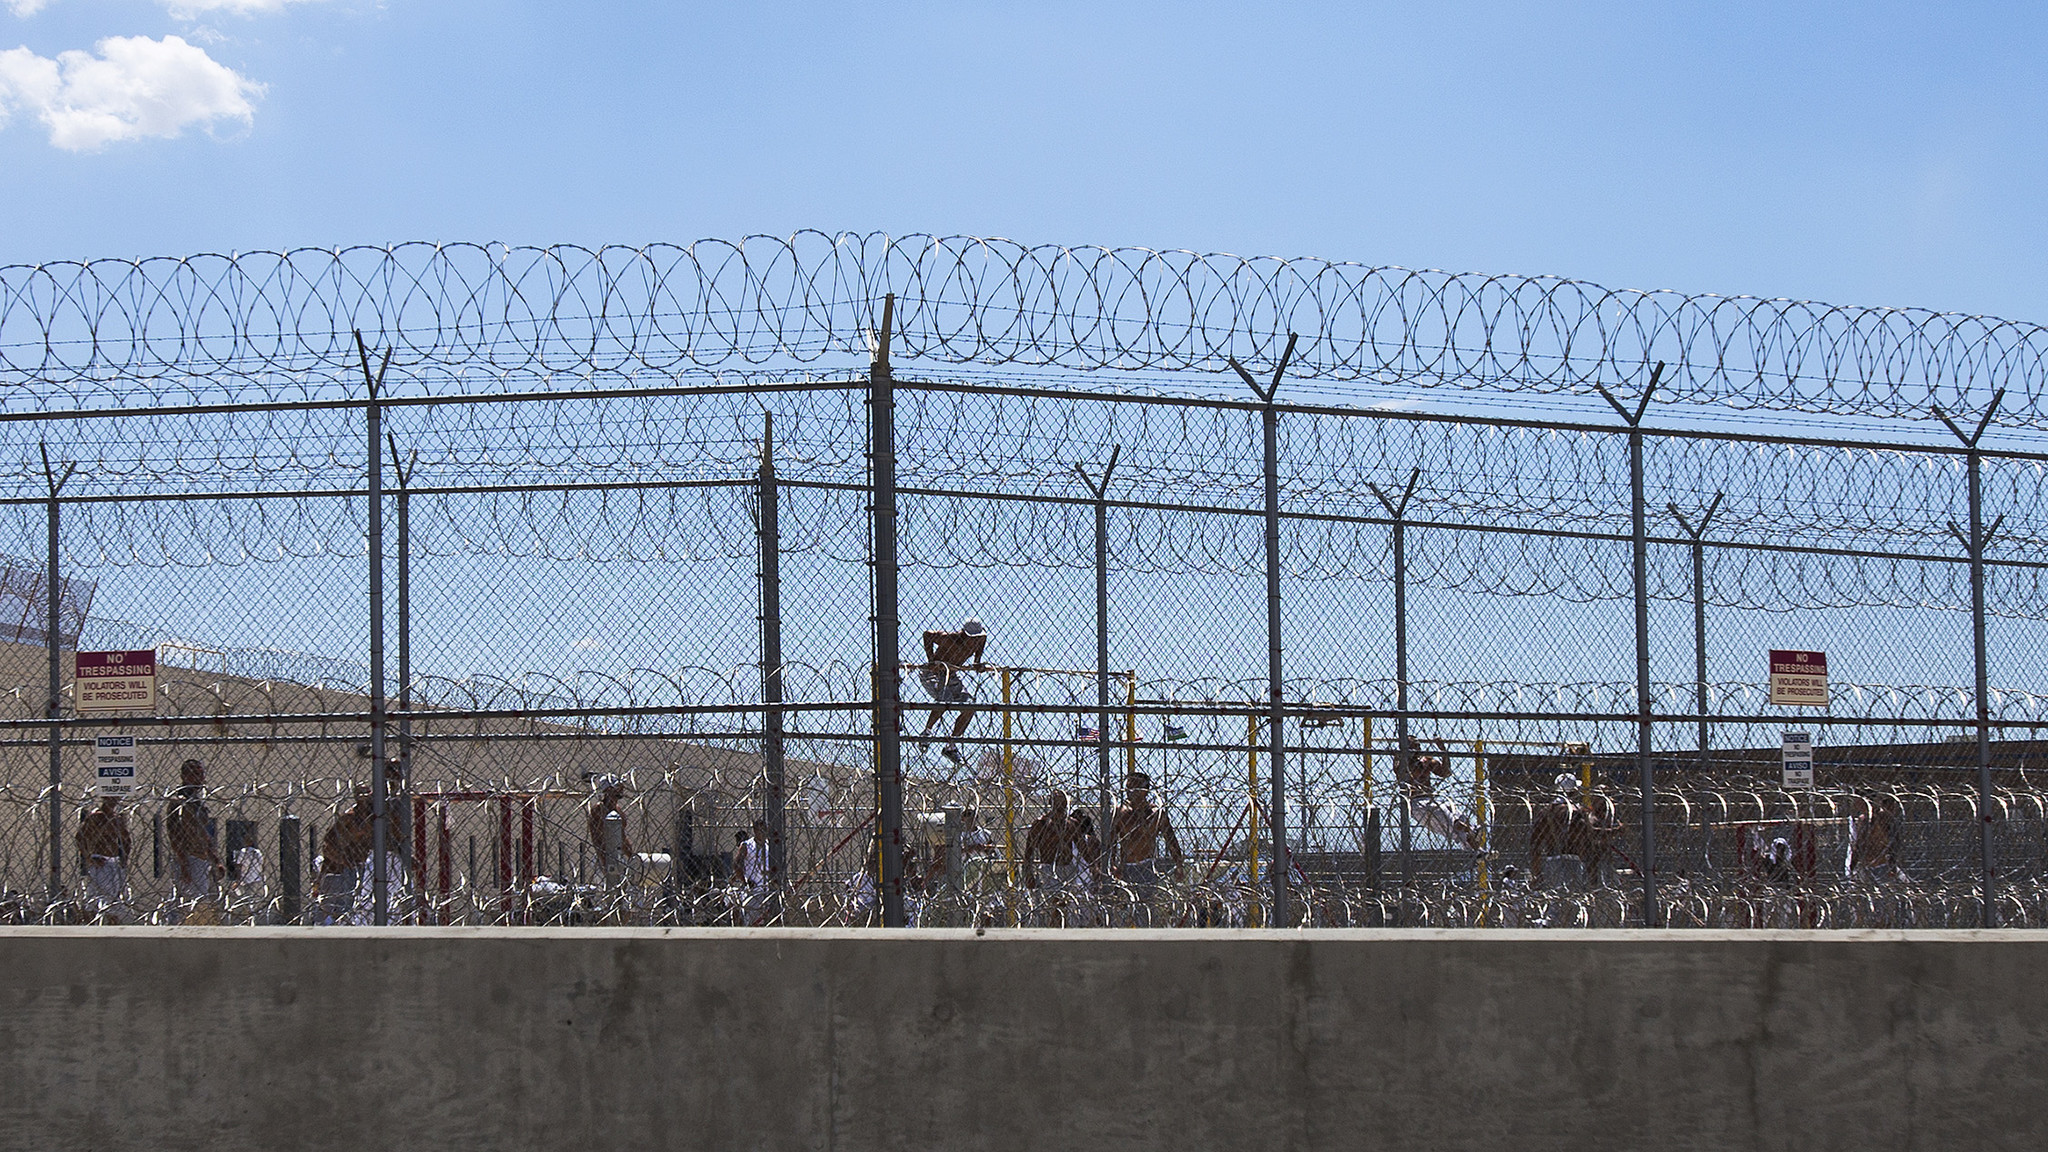 ADELANTO, CA - JULY 7, 2014: Detainees work out in the yard behind double fencing and barbed wire at